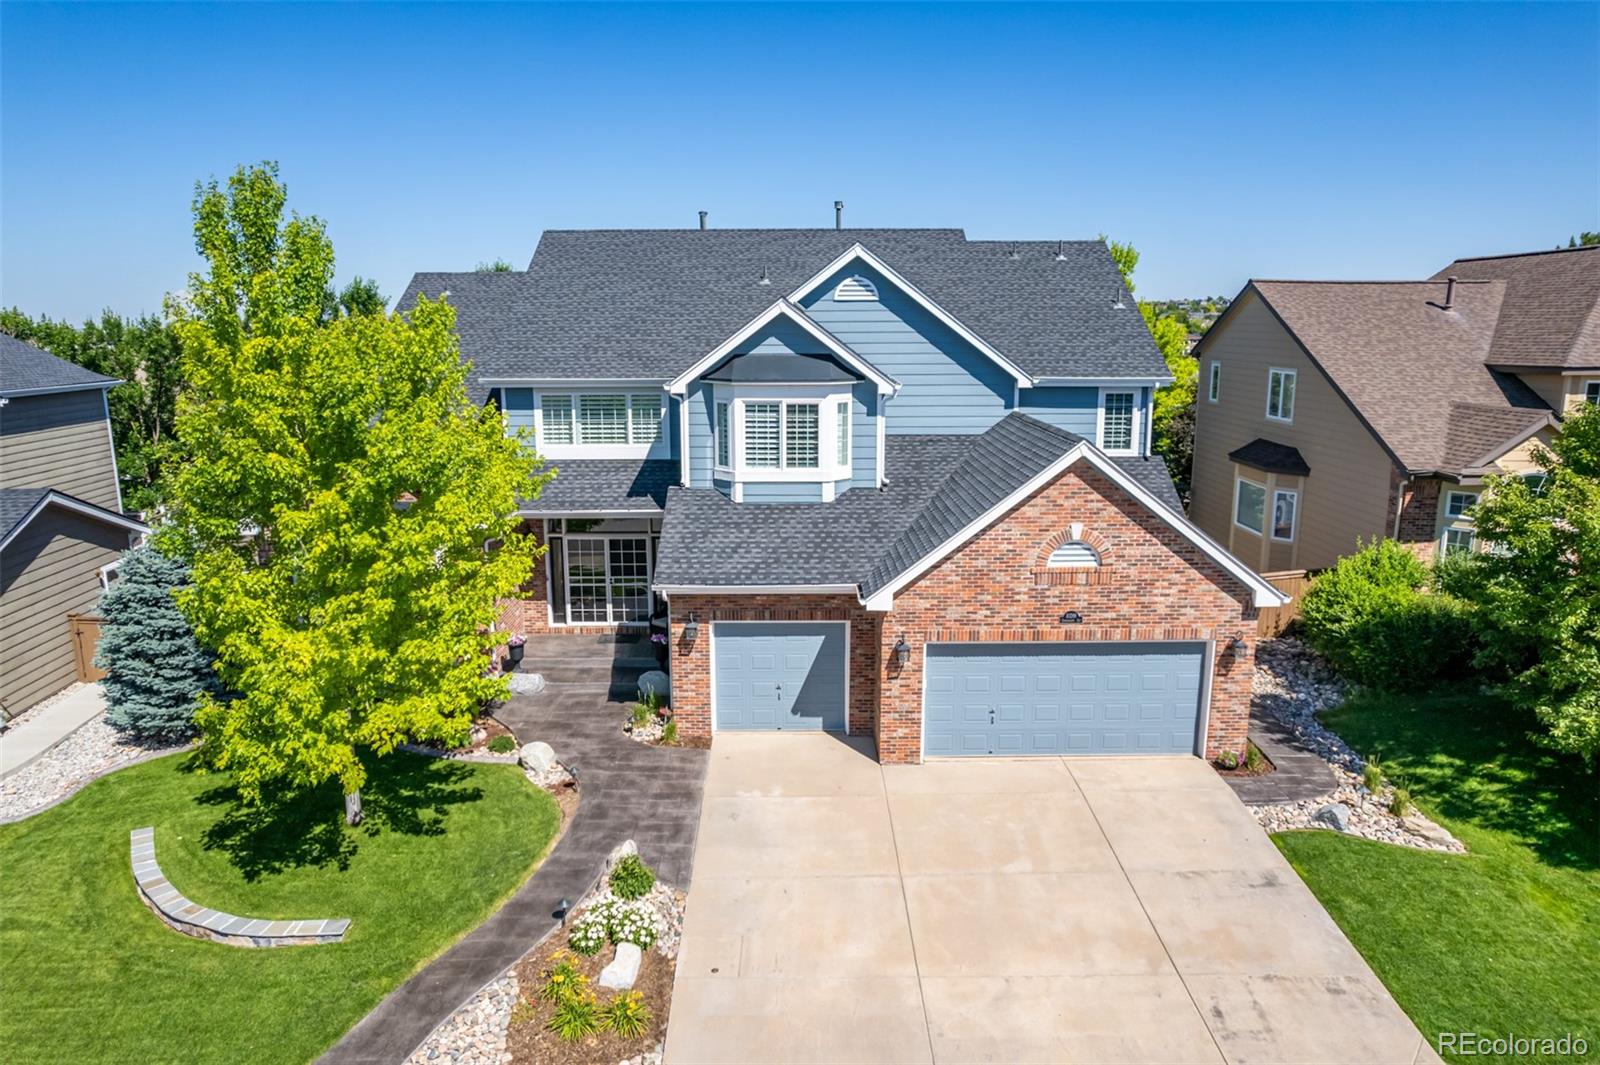 10289  charissglen circle, Highlands Ranch sold home. Closed on 2024-01-16 for $1,175,000.